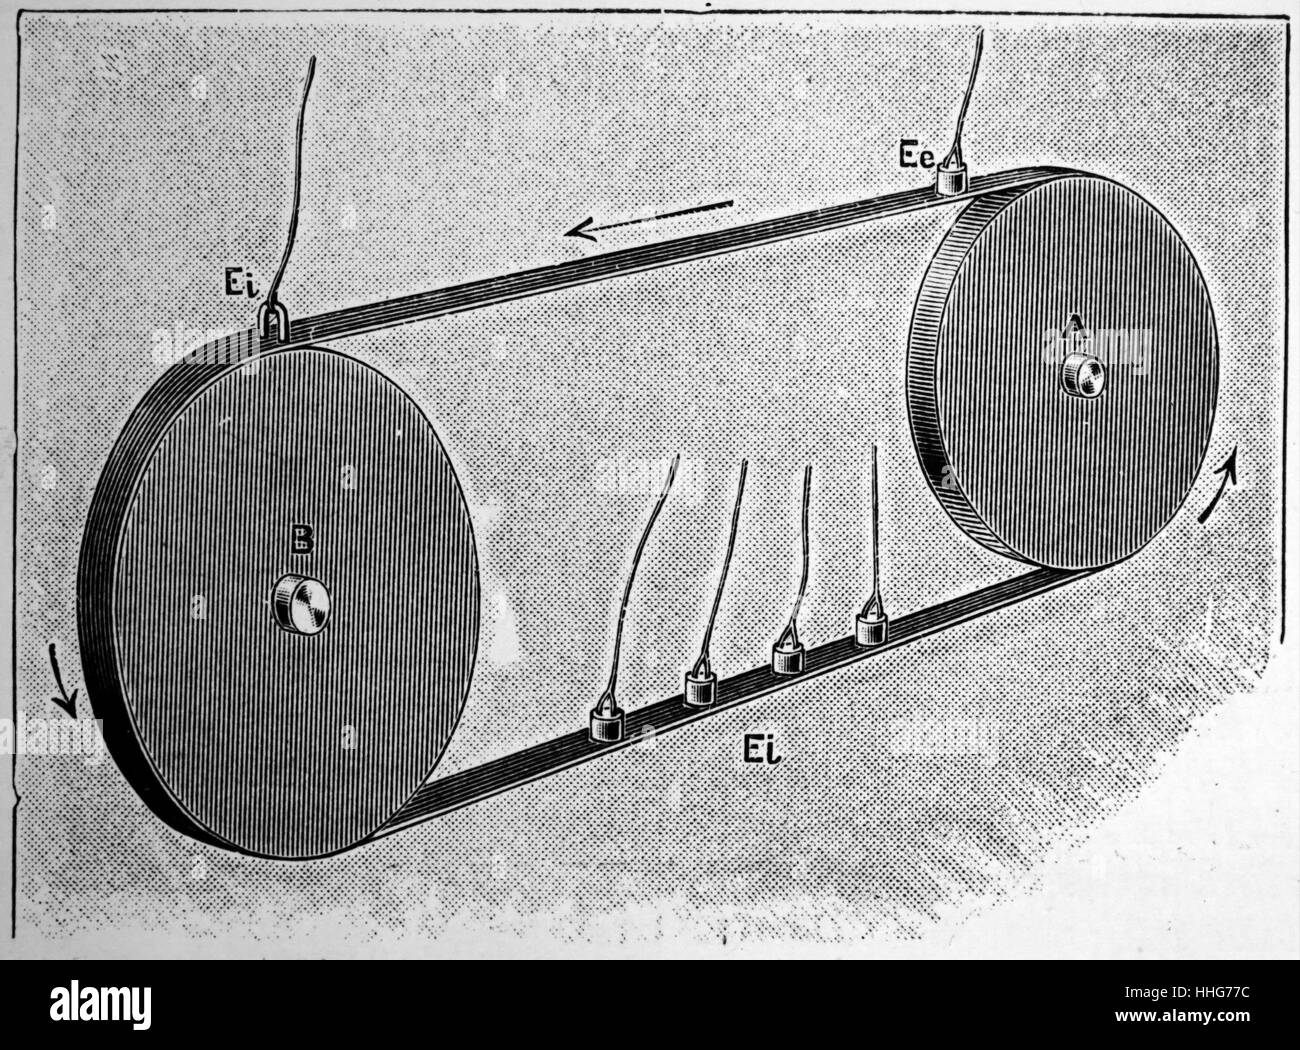 TELEGRAPHONE: magnetic recording tele phone invented by Valdemar Poulsen (1869-1942). He applied for a patent on 1 December 1898; and the instrument aroused interest at the Paris Exposition of 1900. RIBBON